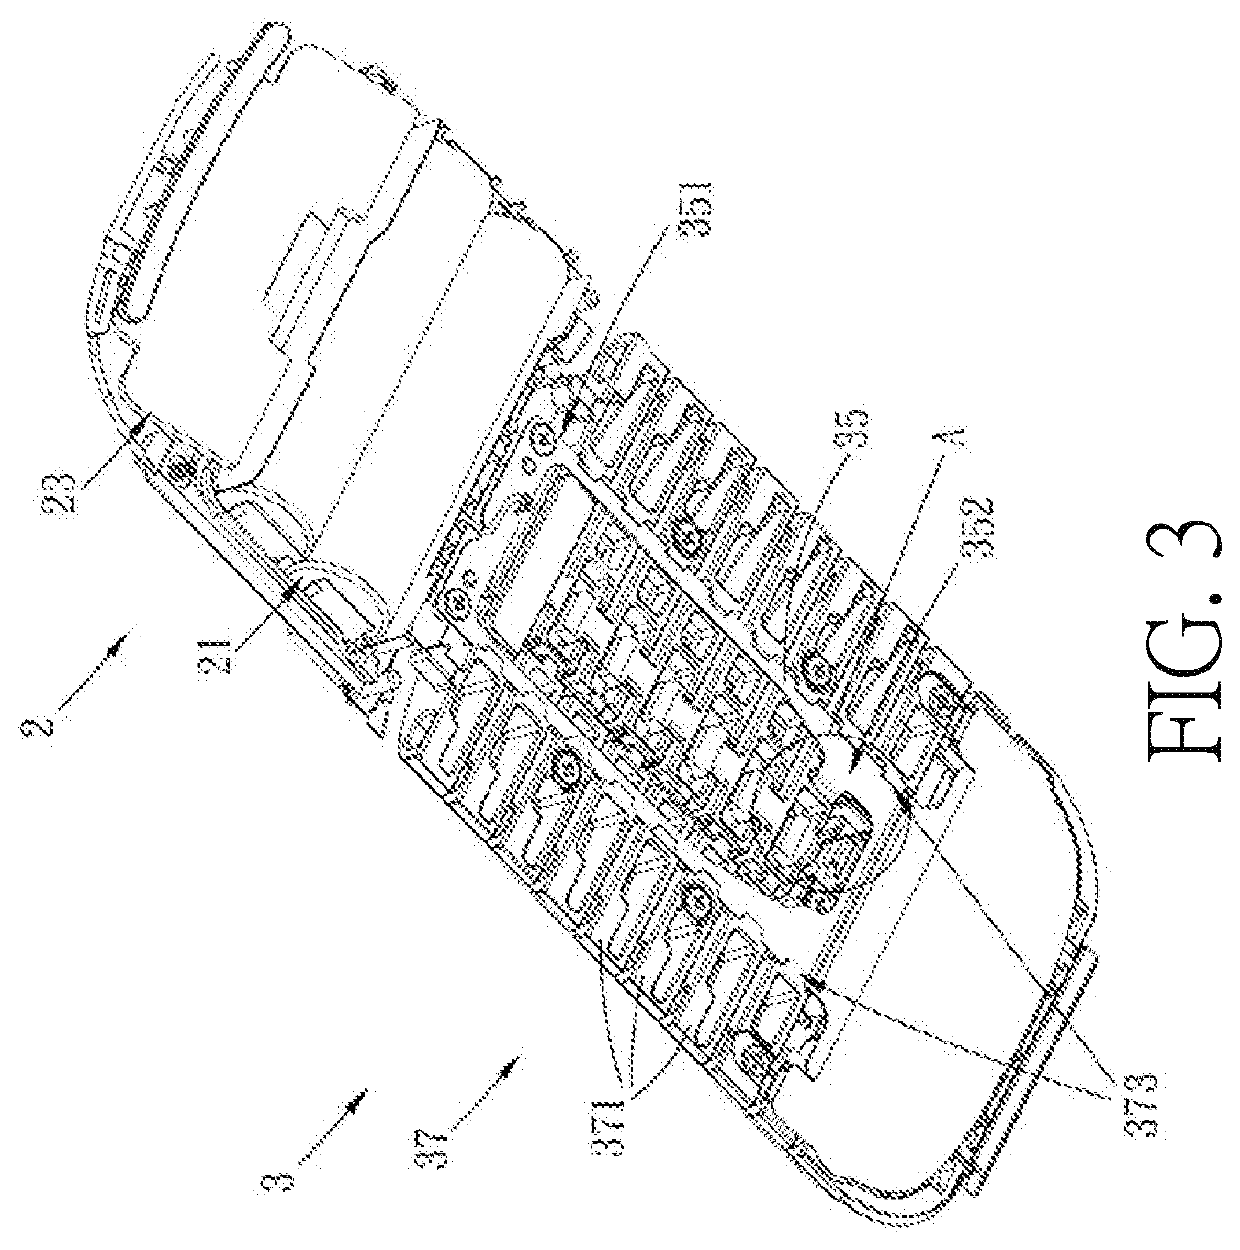 Foldable mouse device